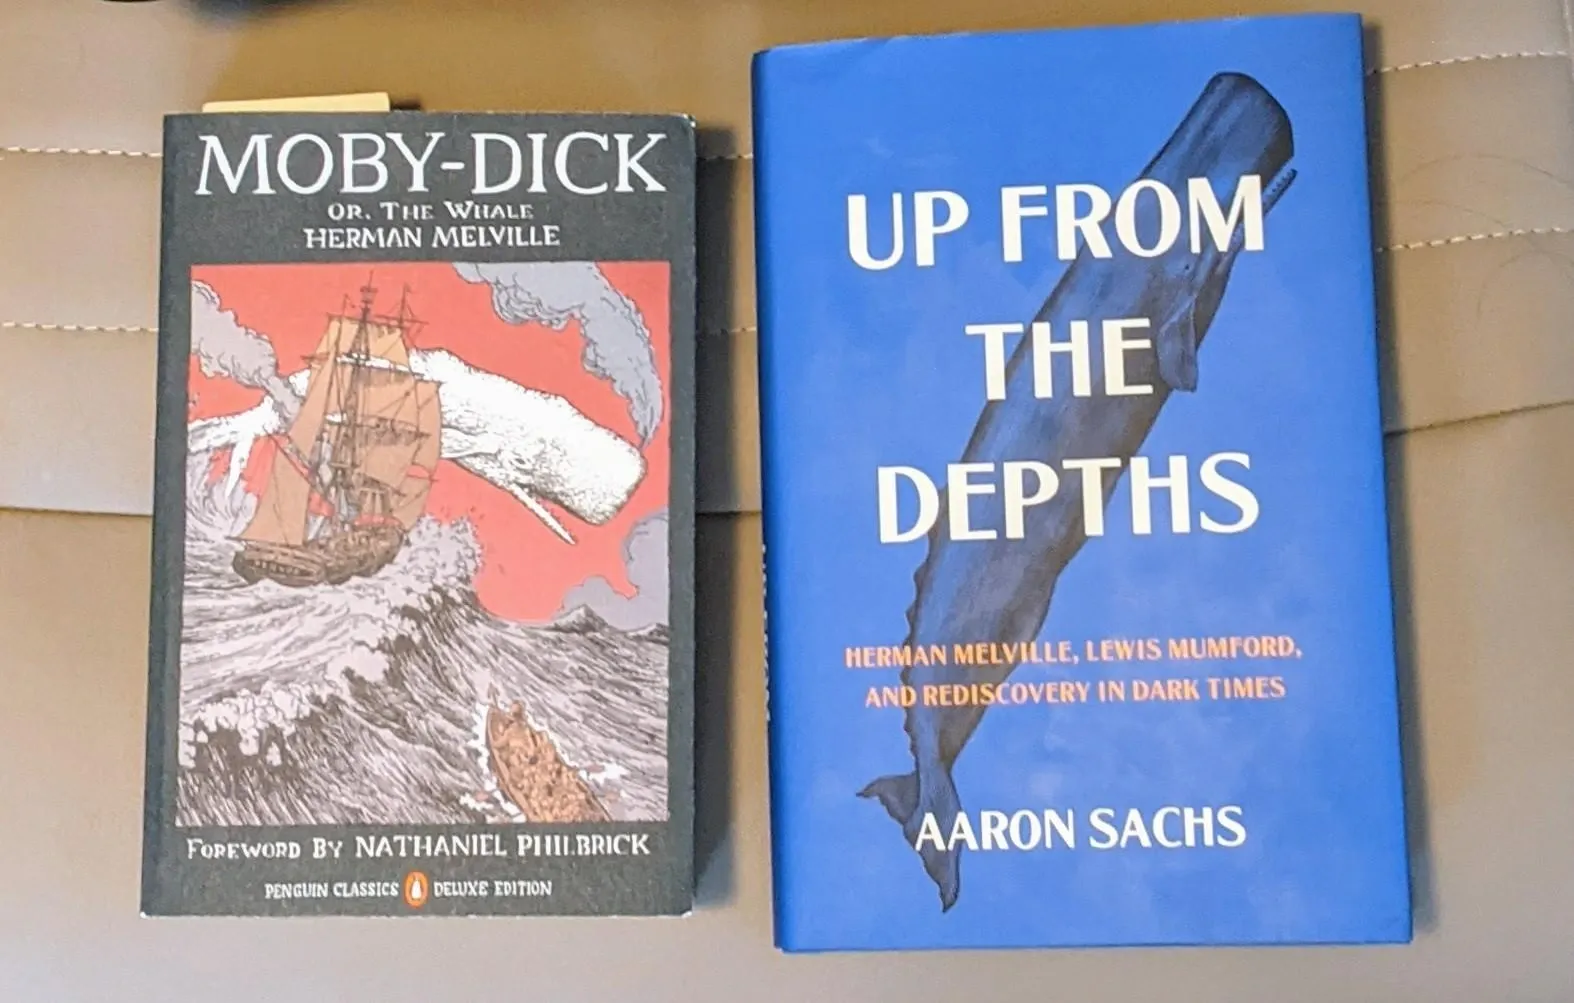 Moby-Dick by Herman Melville and Up from the Depths by Aaron Sachs